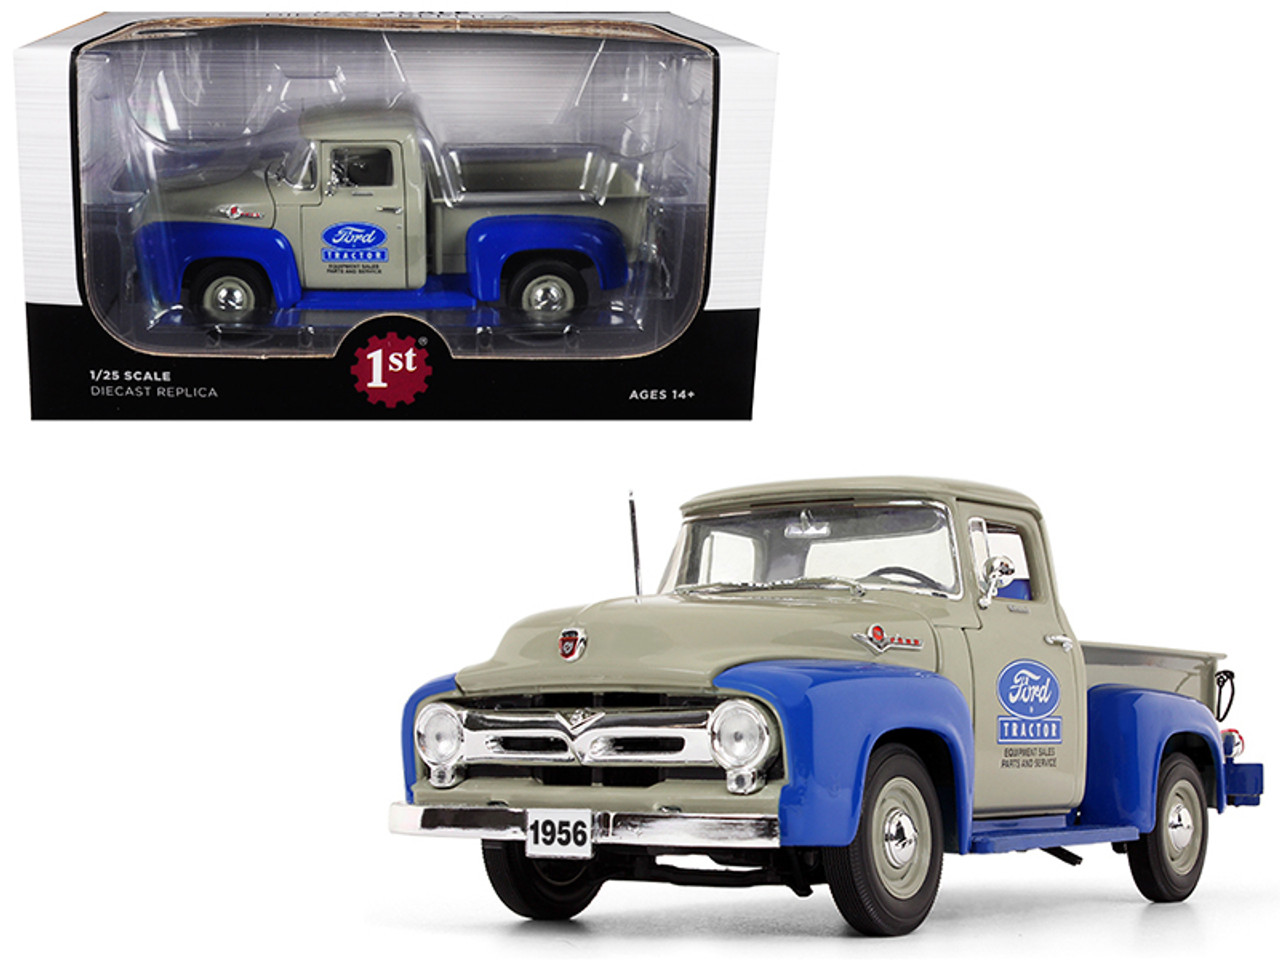 1956 Ford F-100 Pickup Truck High Feature "Ford Tractor Equipment Sales" Gray and Blue 1/25 Diecast Model Car by First Gear